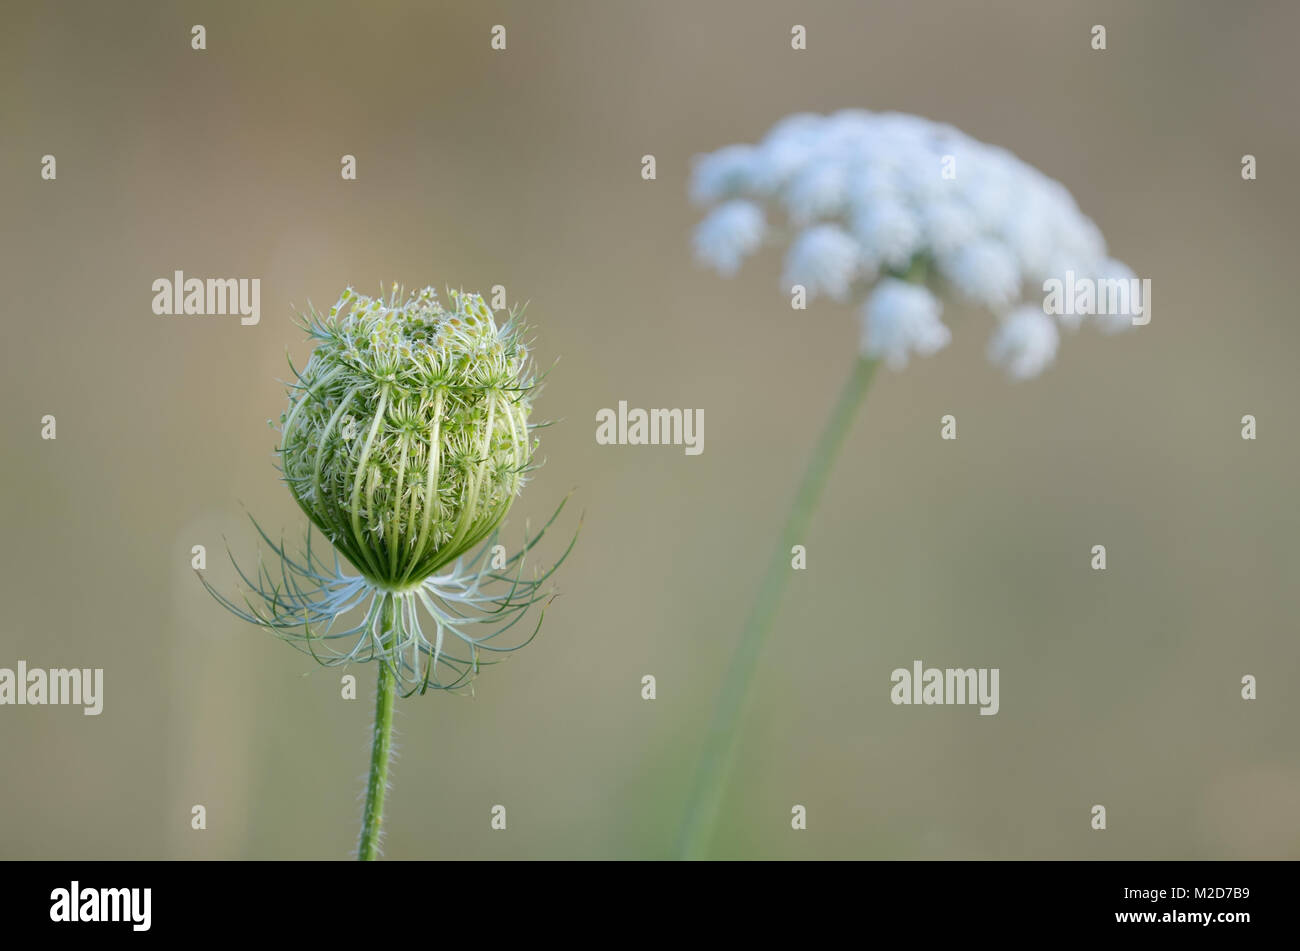 A white flower umbel pod is ready for open. Stock Photo